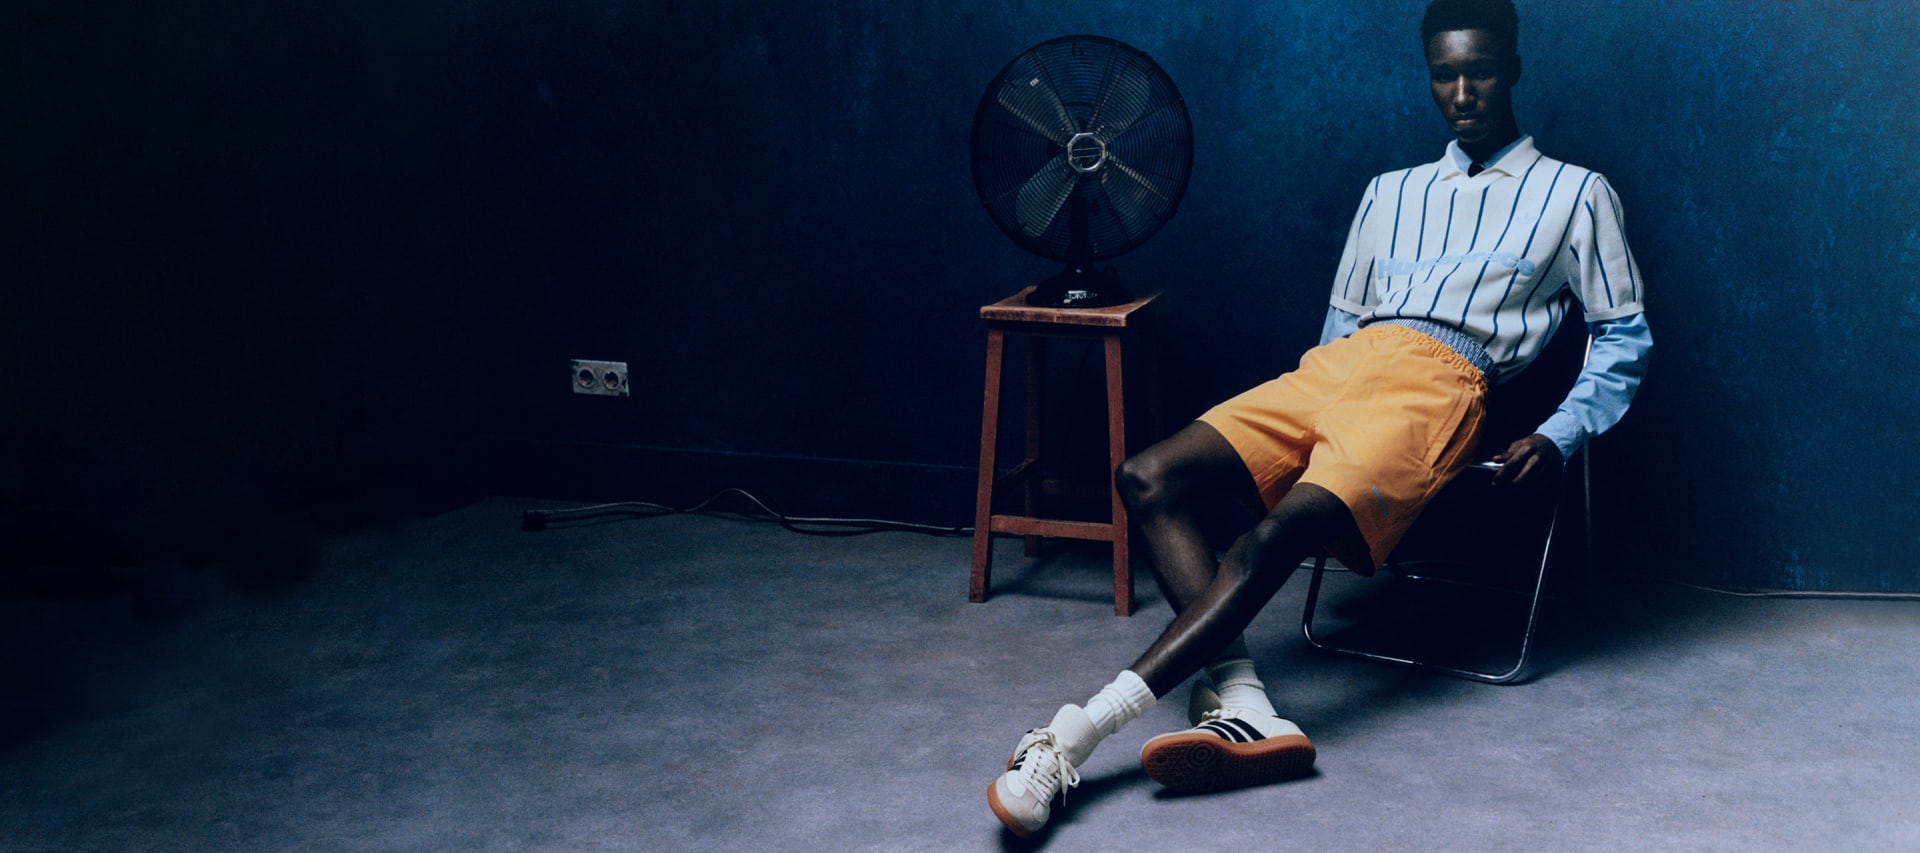 Model wearing blue shirt and orange shorts reclines on chair in dark room